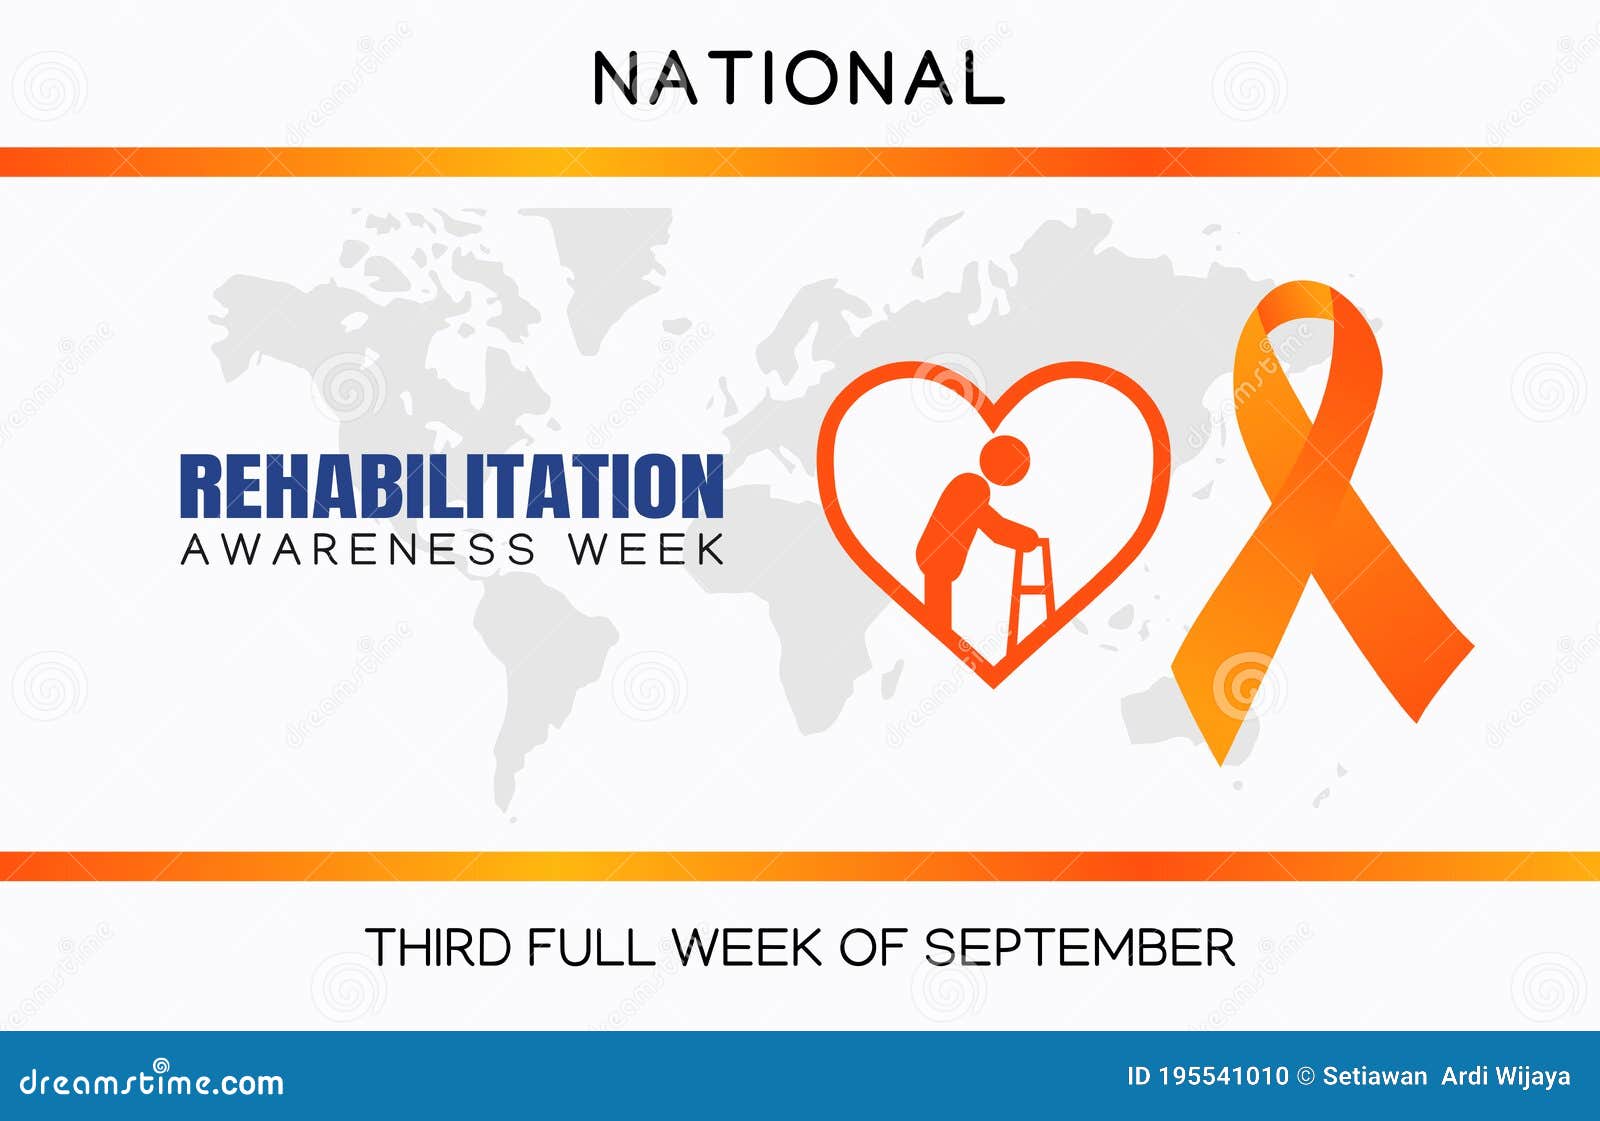 Vector Graphic of National Rehabilitation Awareness Week Good for